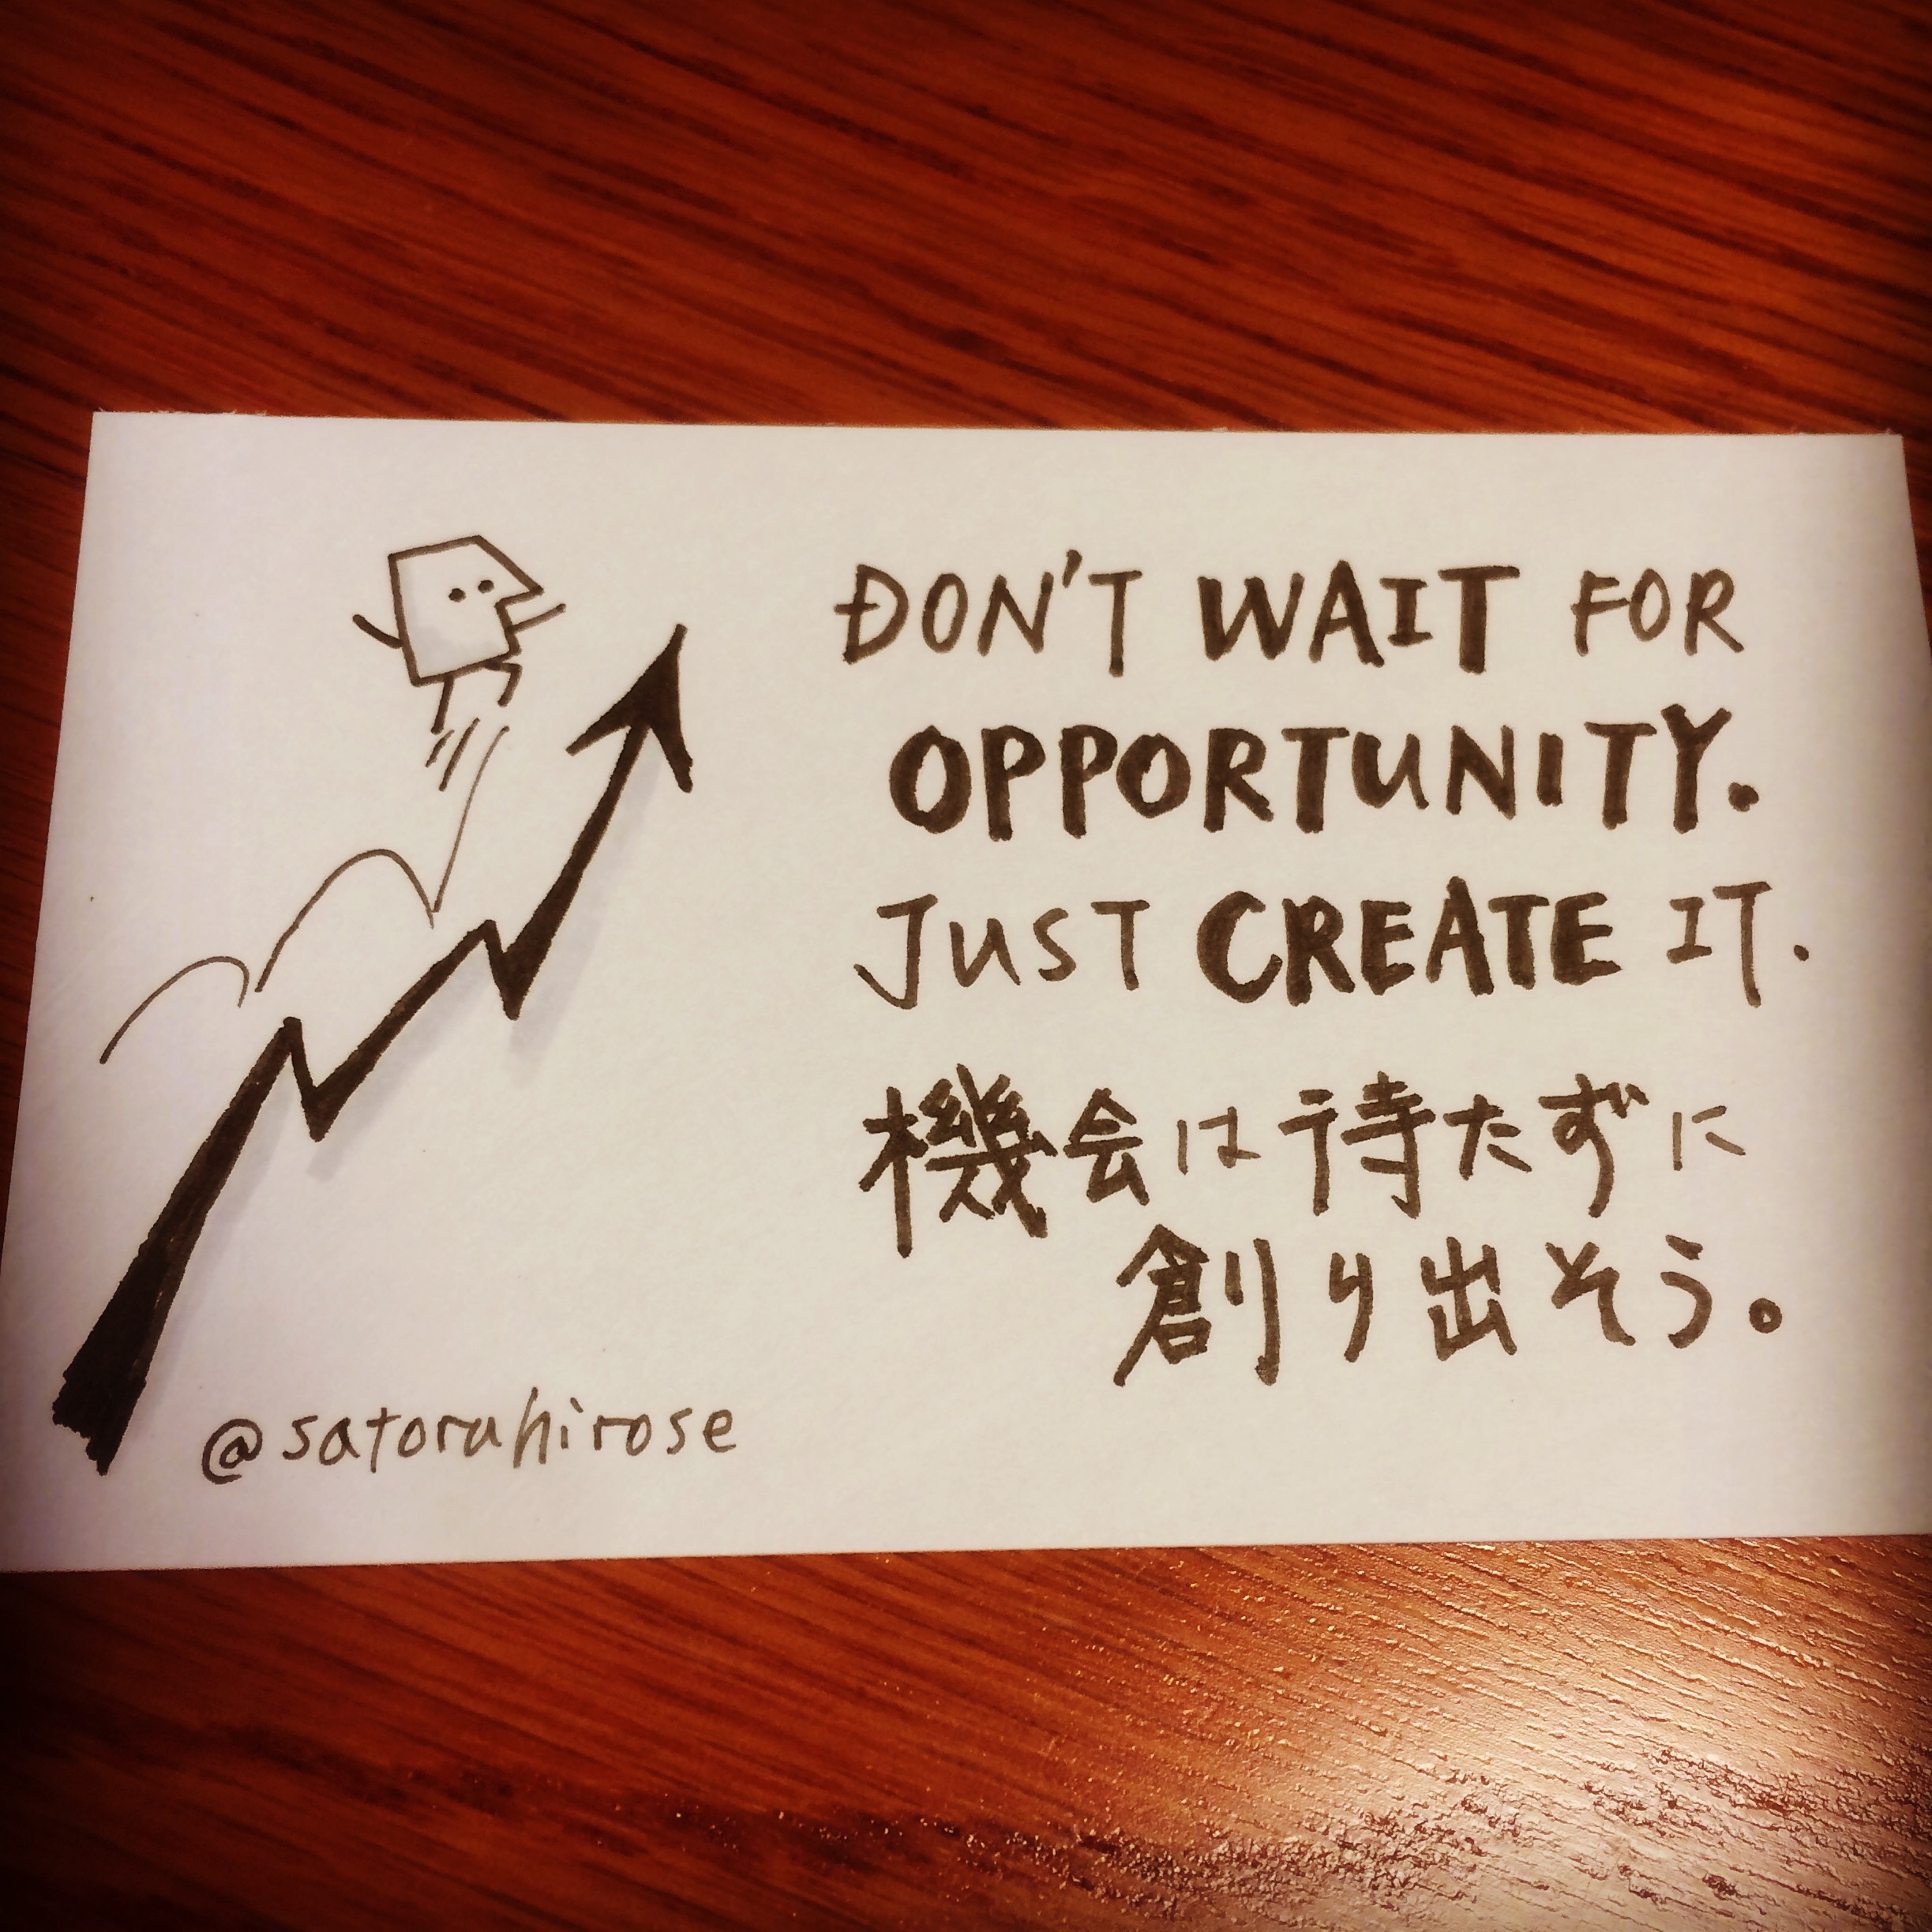 Don't wait for opportunity. Just create it.